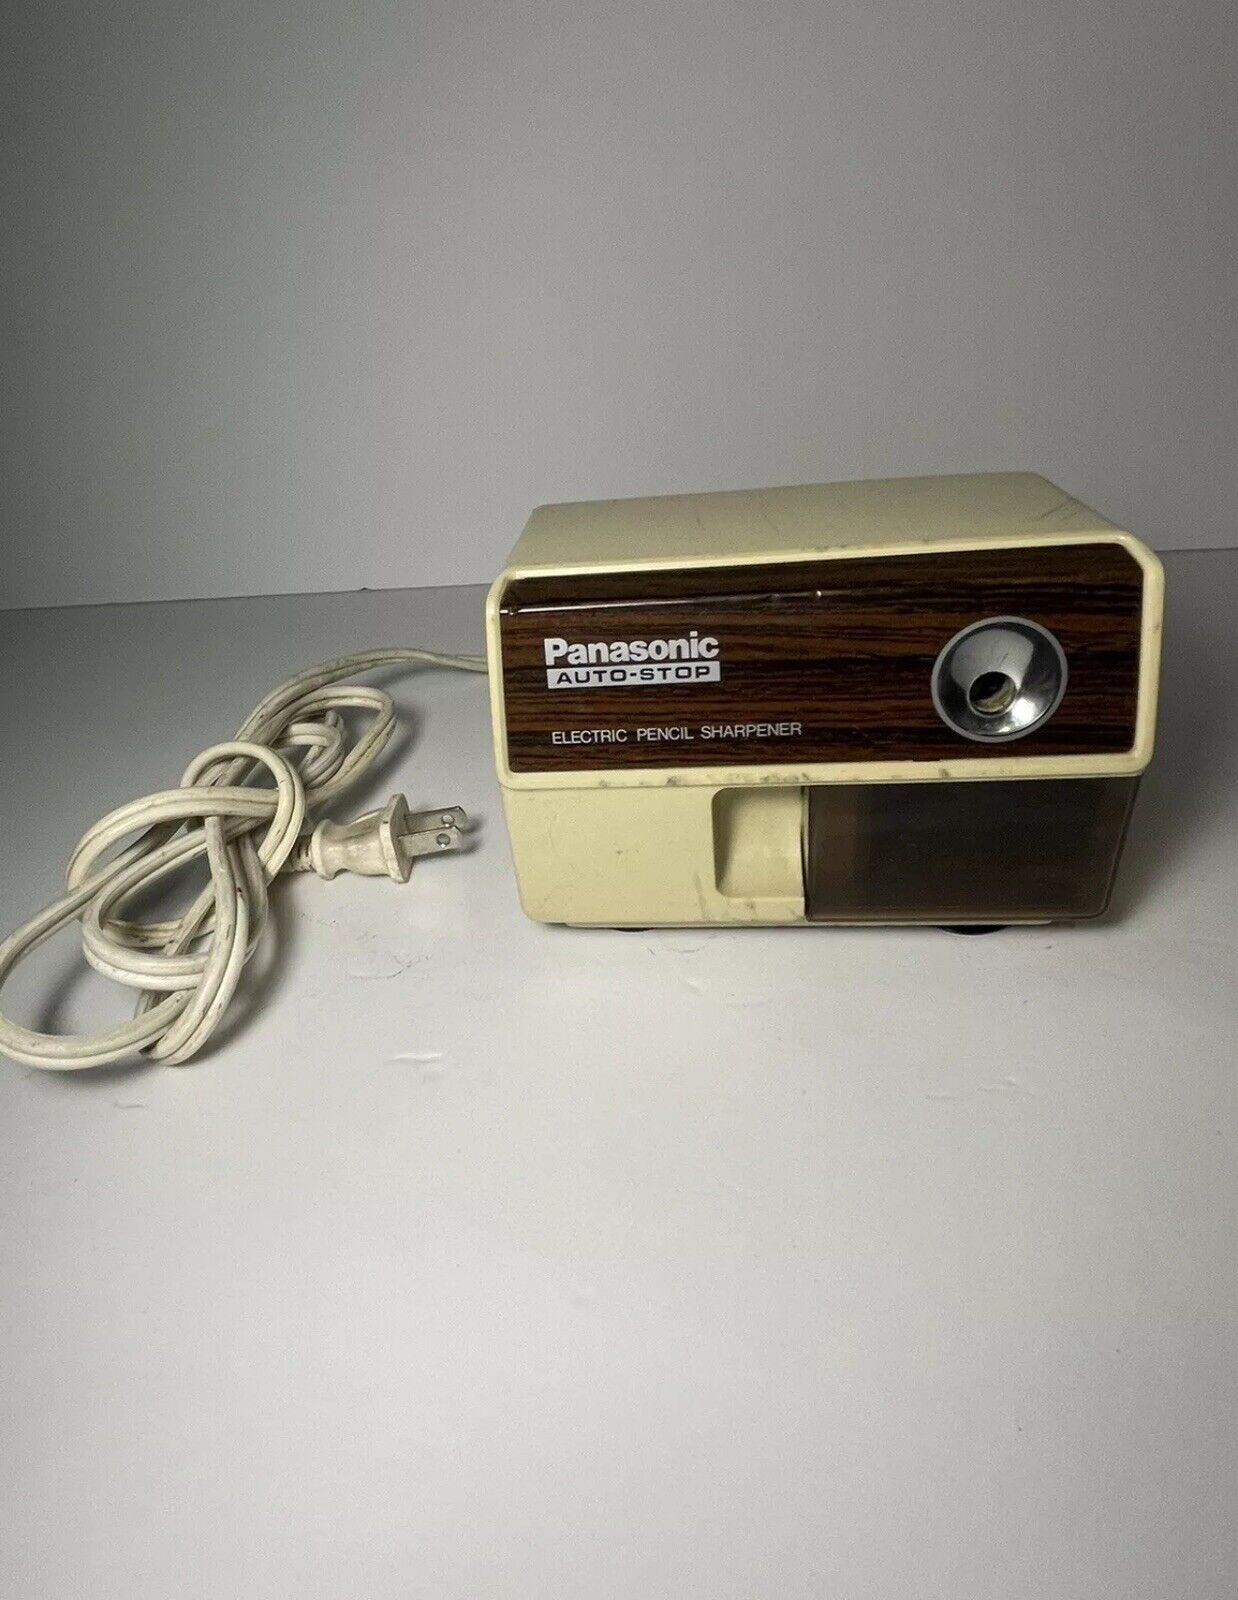 1980 Vintage PANASONIC Auto-Stop Electric Pencil Sharpener - TESTED / WORKS